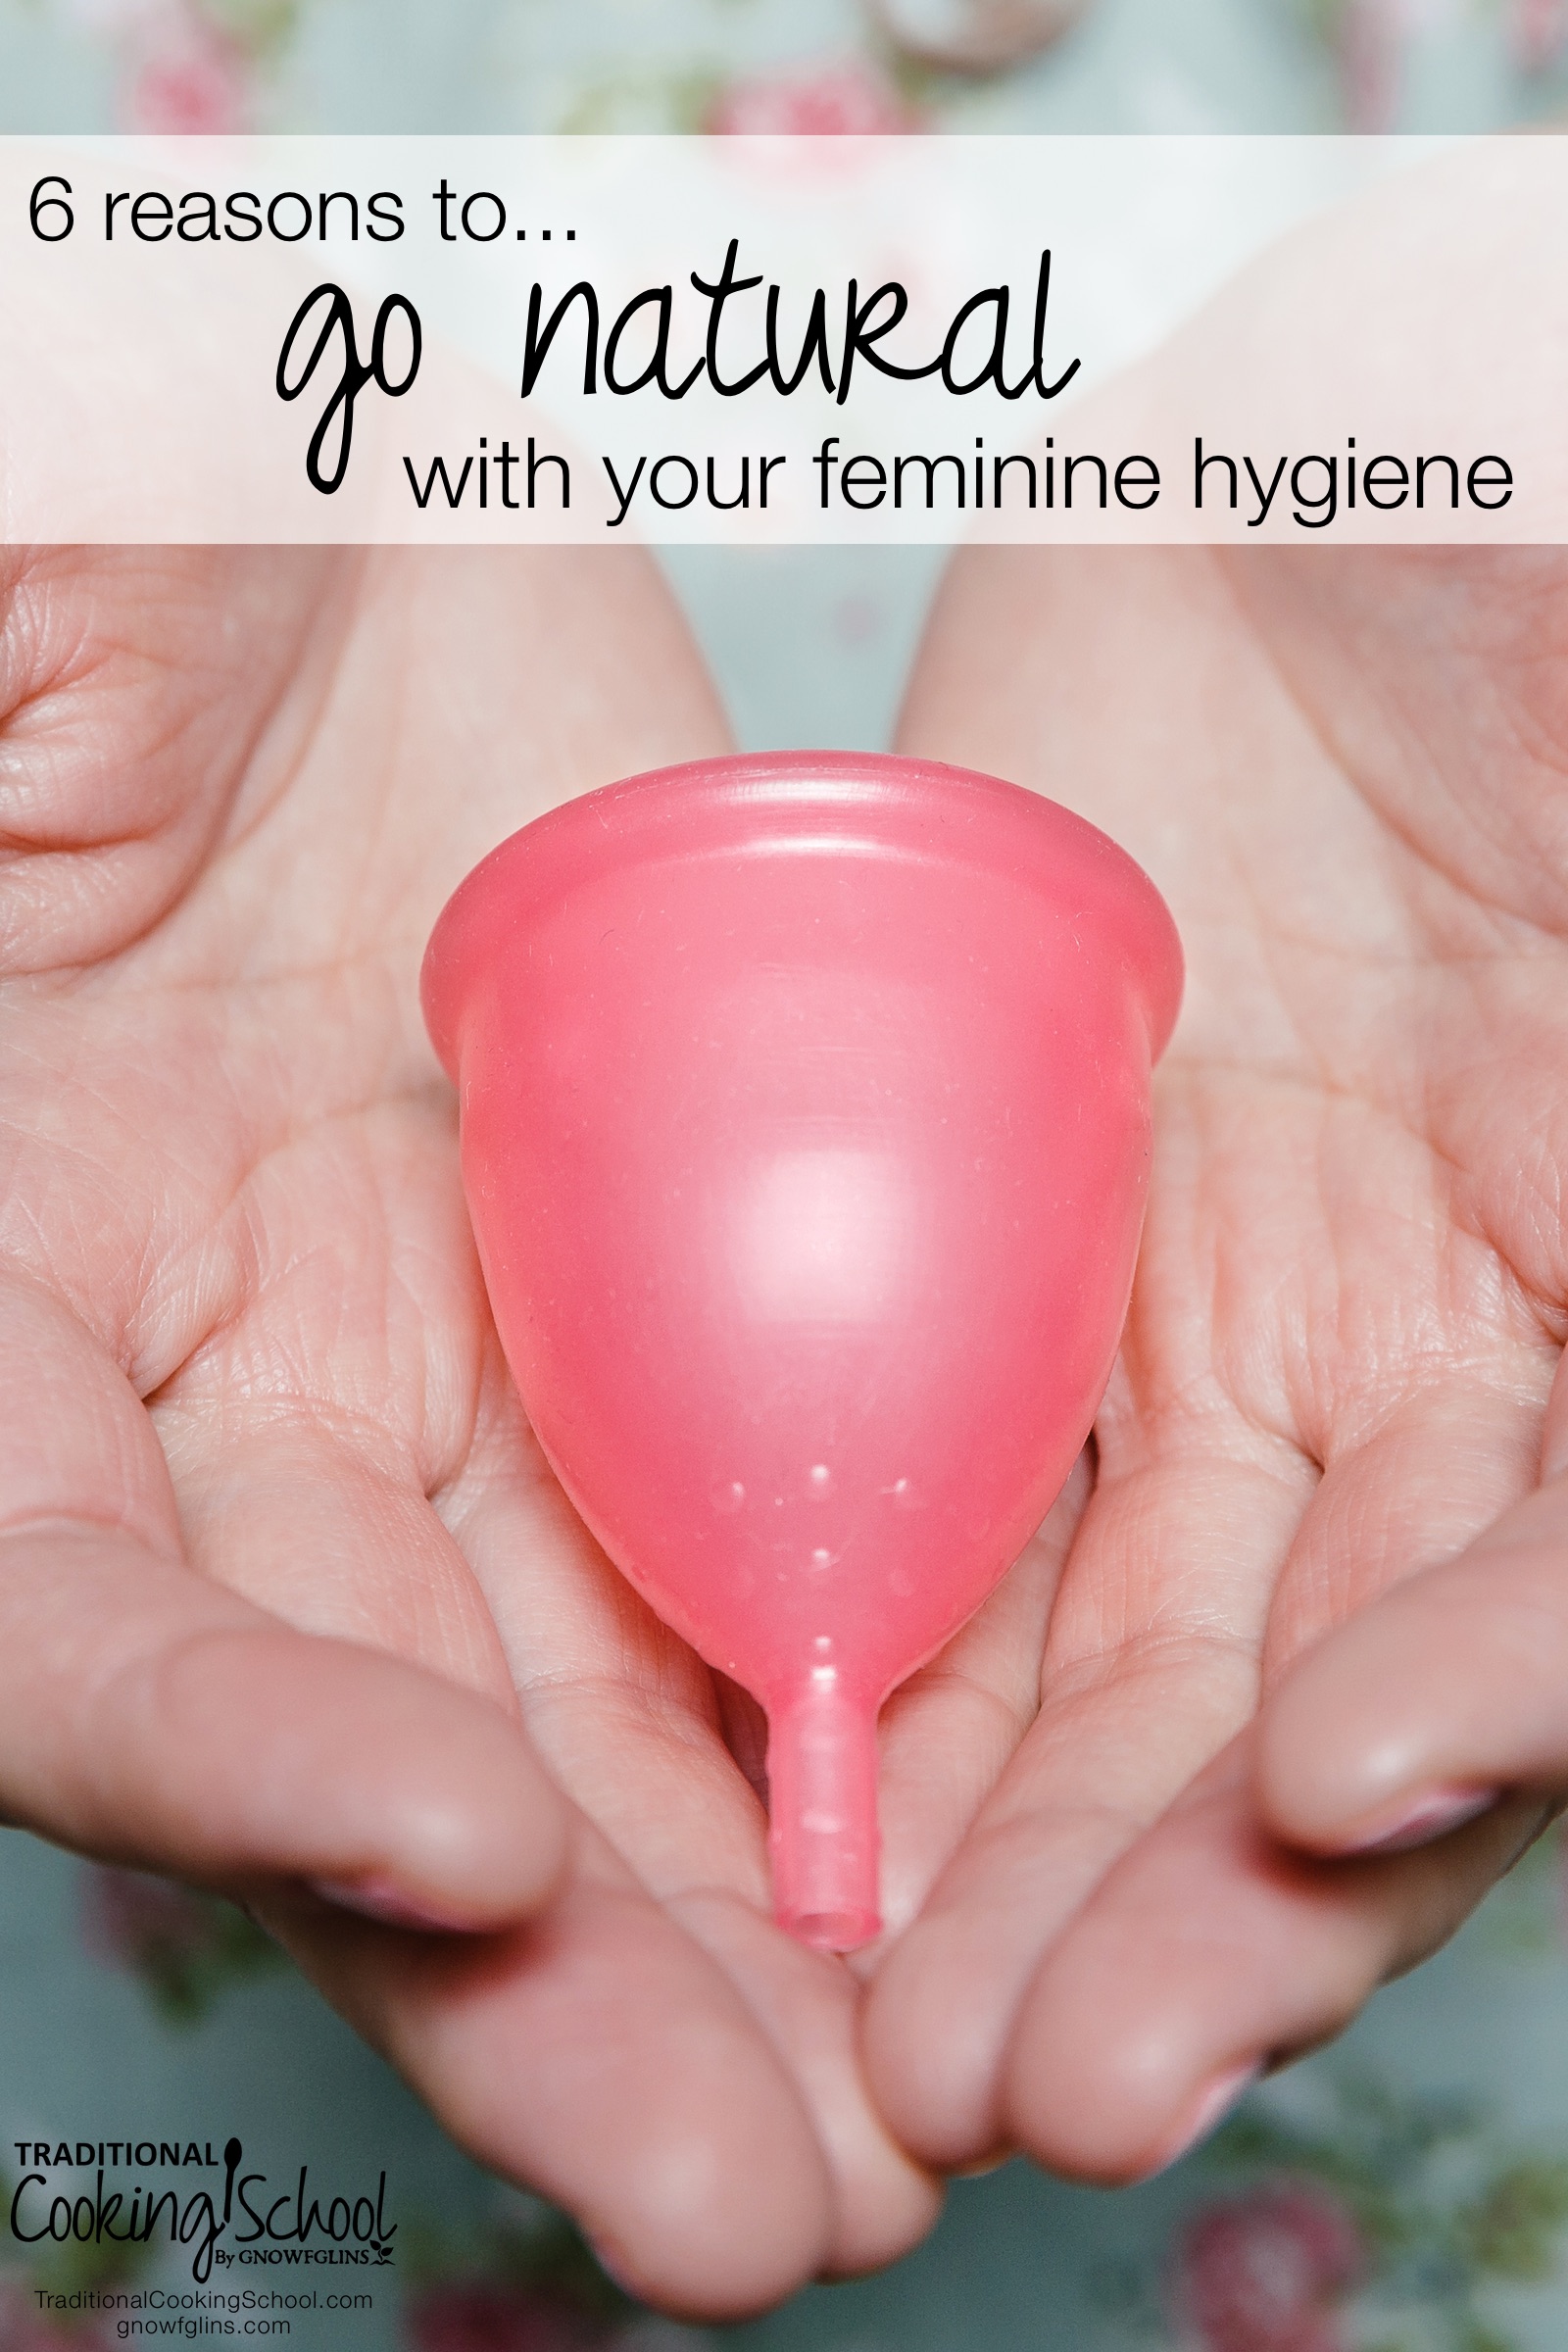 6 Reasons To Go Natural With Your Feminine Hygiene | You wouldn't think that feminine hygiene has anything to do with nourishment, would you? It does! Female private areas are highly sensitive and important to our overall health and happiness, yet many products contain harmful synthetic materials and chlorine. Here are 6 reasons why natural products are so much better, plus ideas for natural products to support our monthly cycles. | TraditionalCookingSchool.com